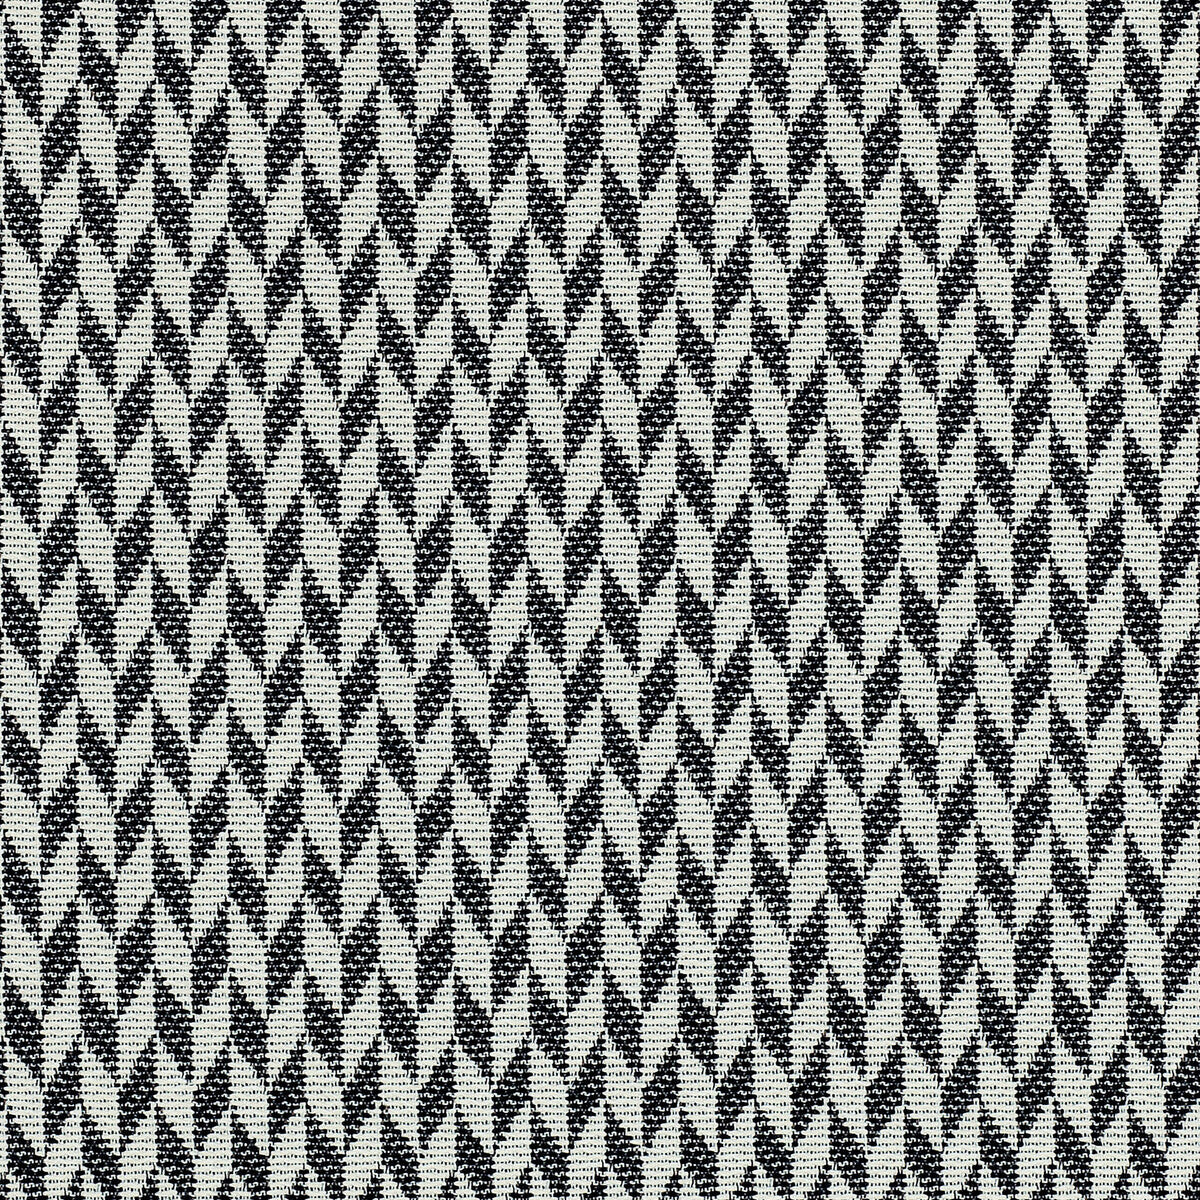 Tupai Outdoor fabric in 601 color - pattern 36200.81.0 - by Kravet Couture in the Missoni Home collection